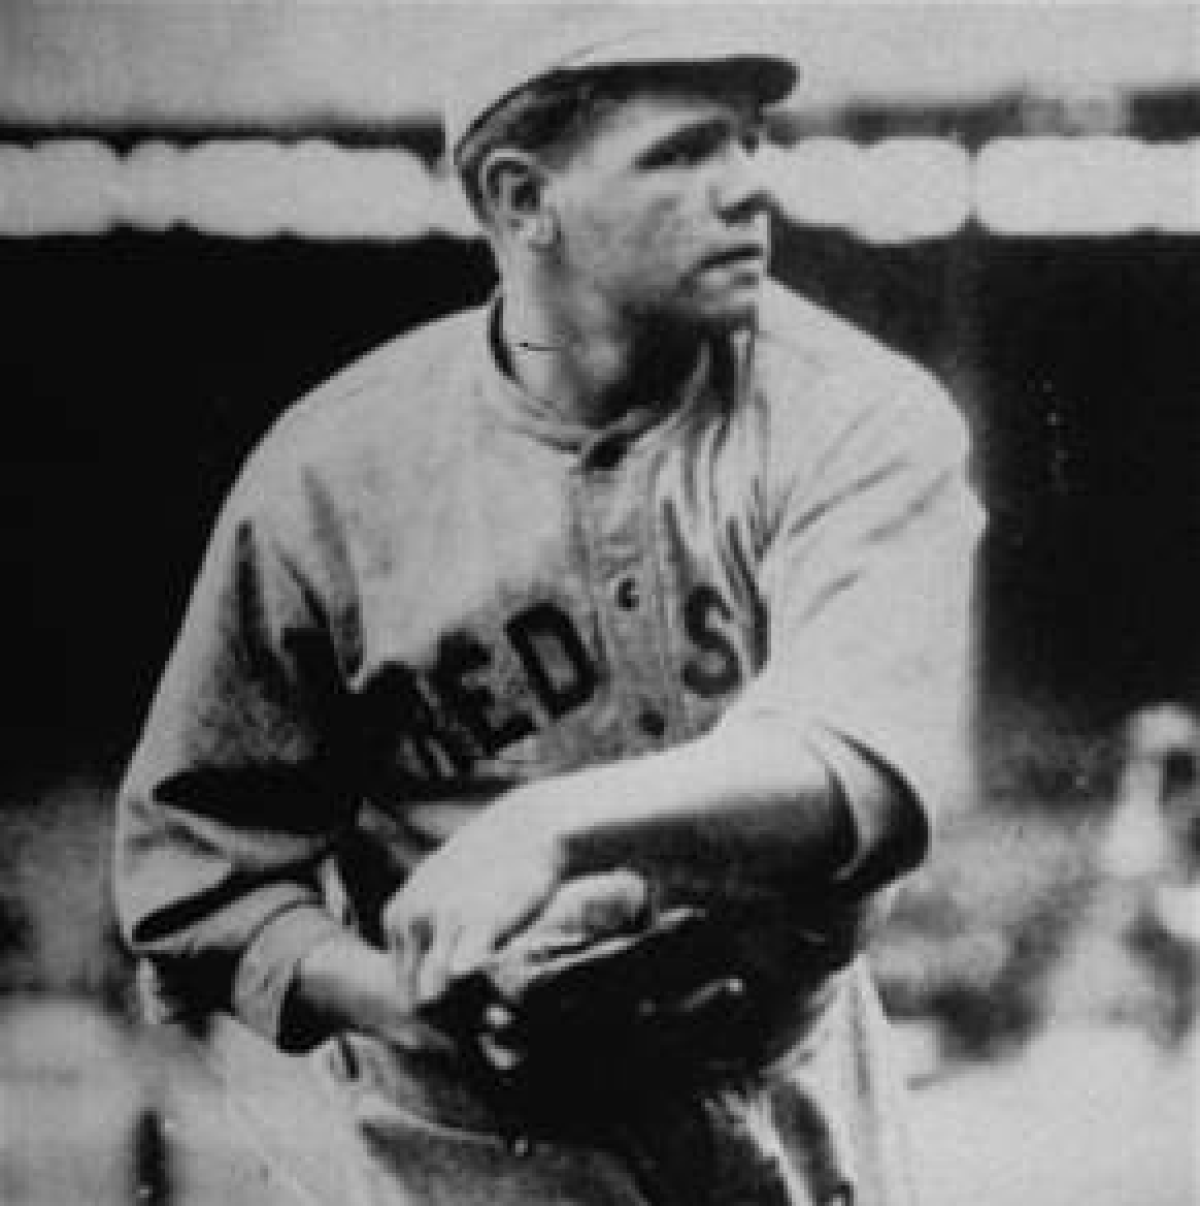 Babe Ruth Led Red Sox Into Last World Series Against Dodgers